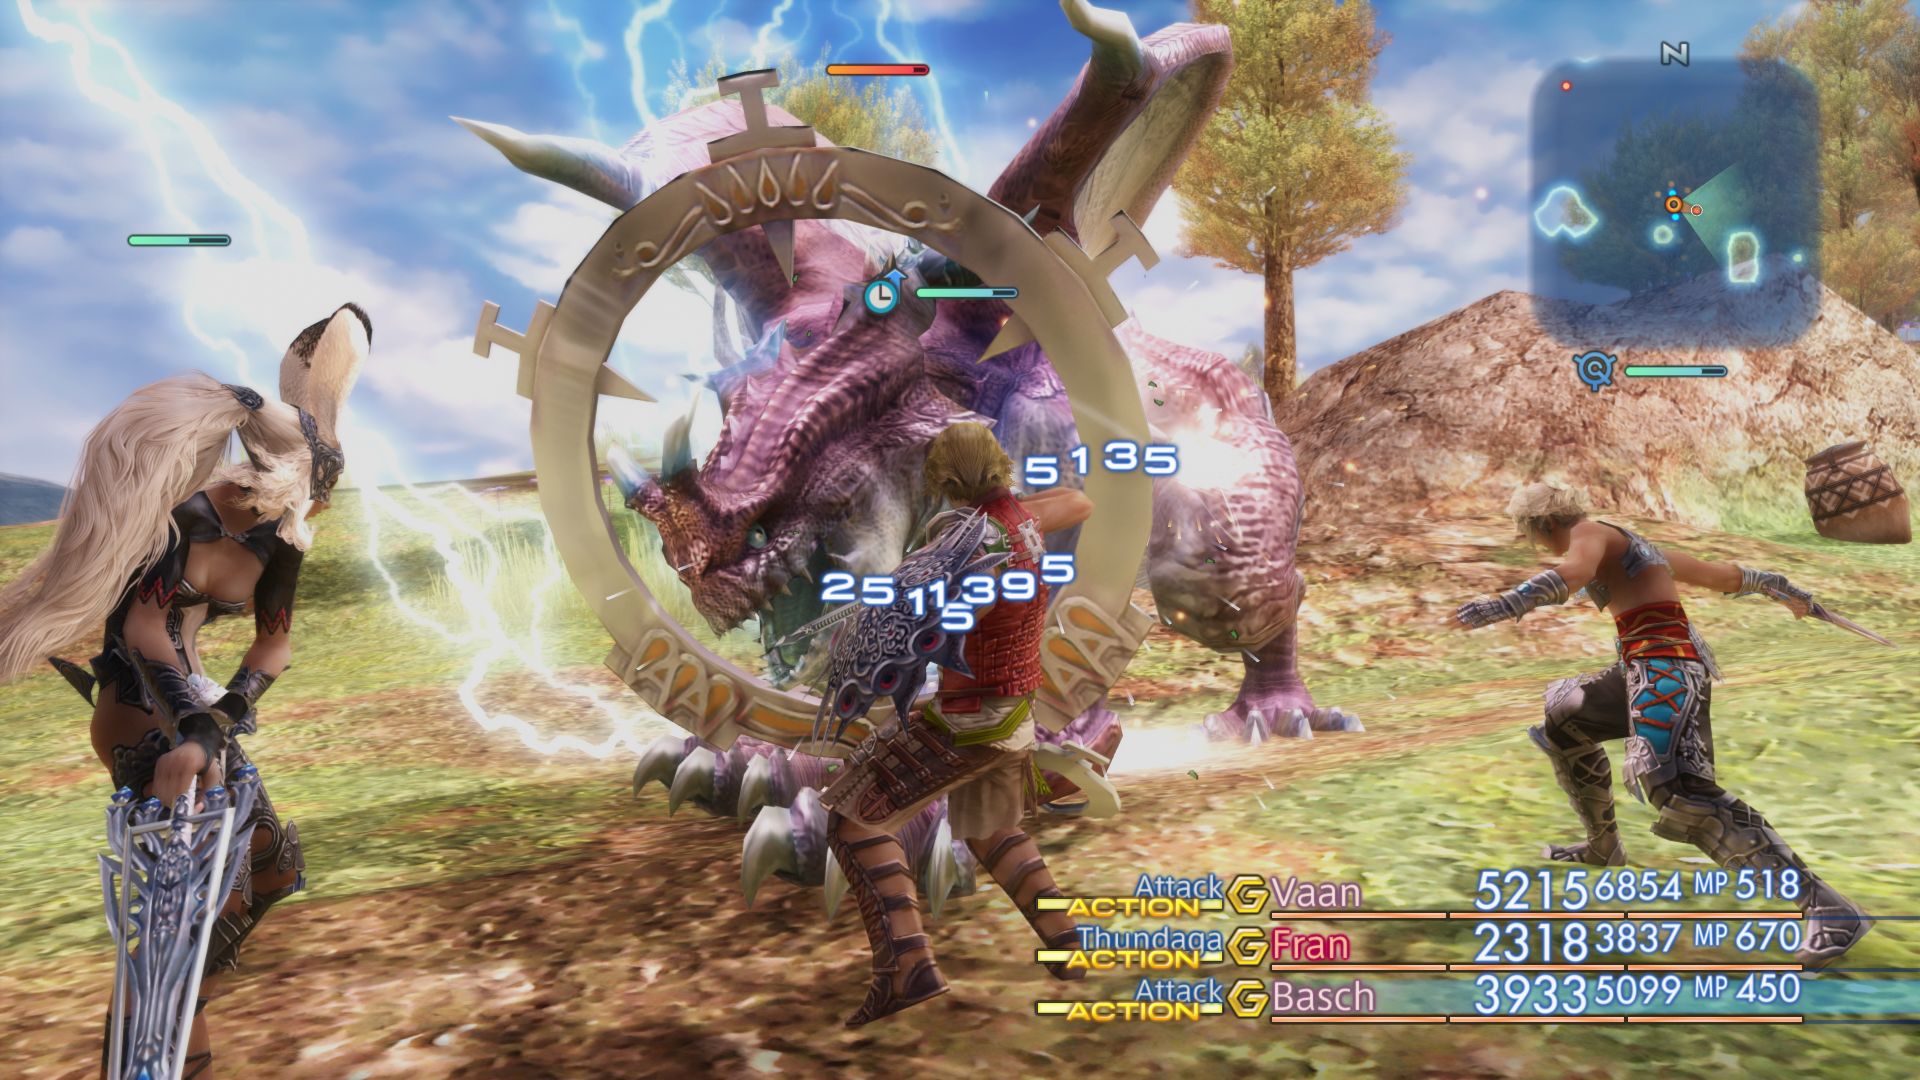 Final Fantasy 12 The Zodiac Age Hits Pc Next Month With 60fps Gameplay Ultra Wide Support And Other New Features Vg247